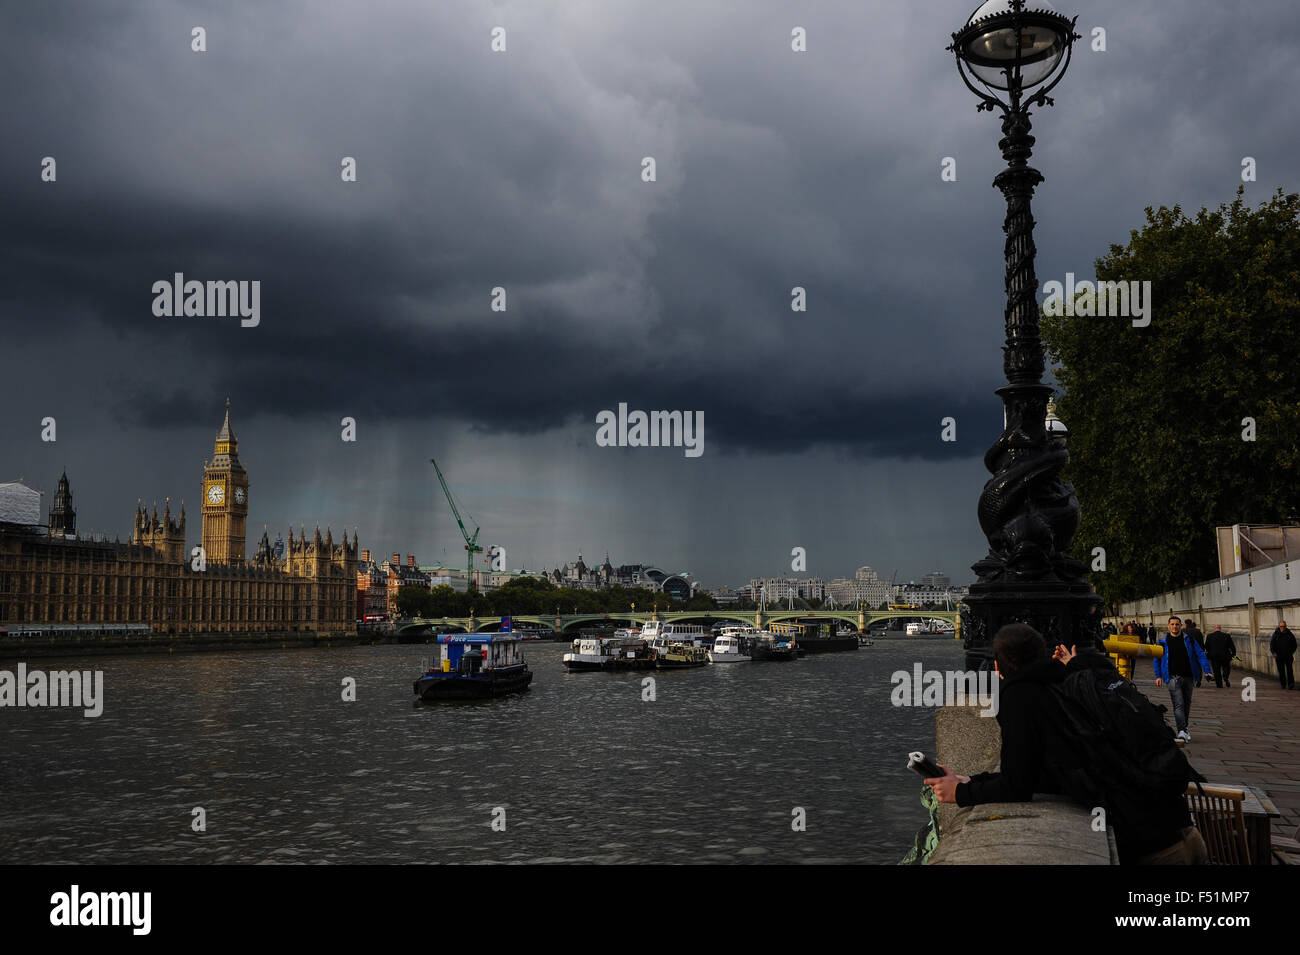 A view of House of Commons and the Thames as a dark cloud approaches with rain falling Stock Photo